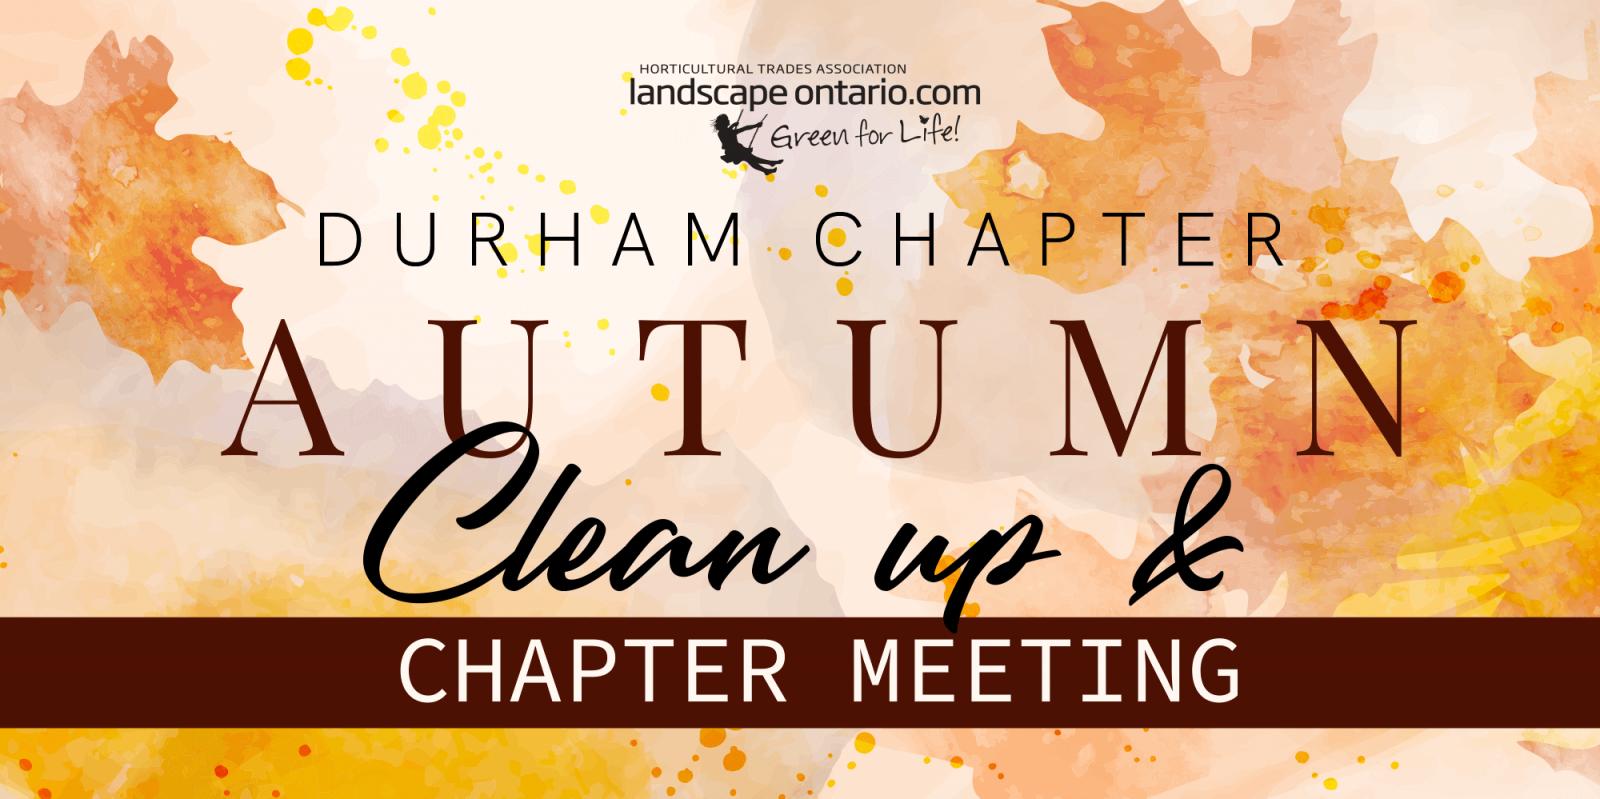 Durham Chapter Meeting and Autumn Clean Up October 17, 2022